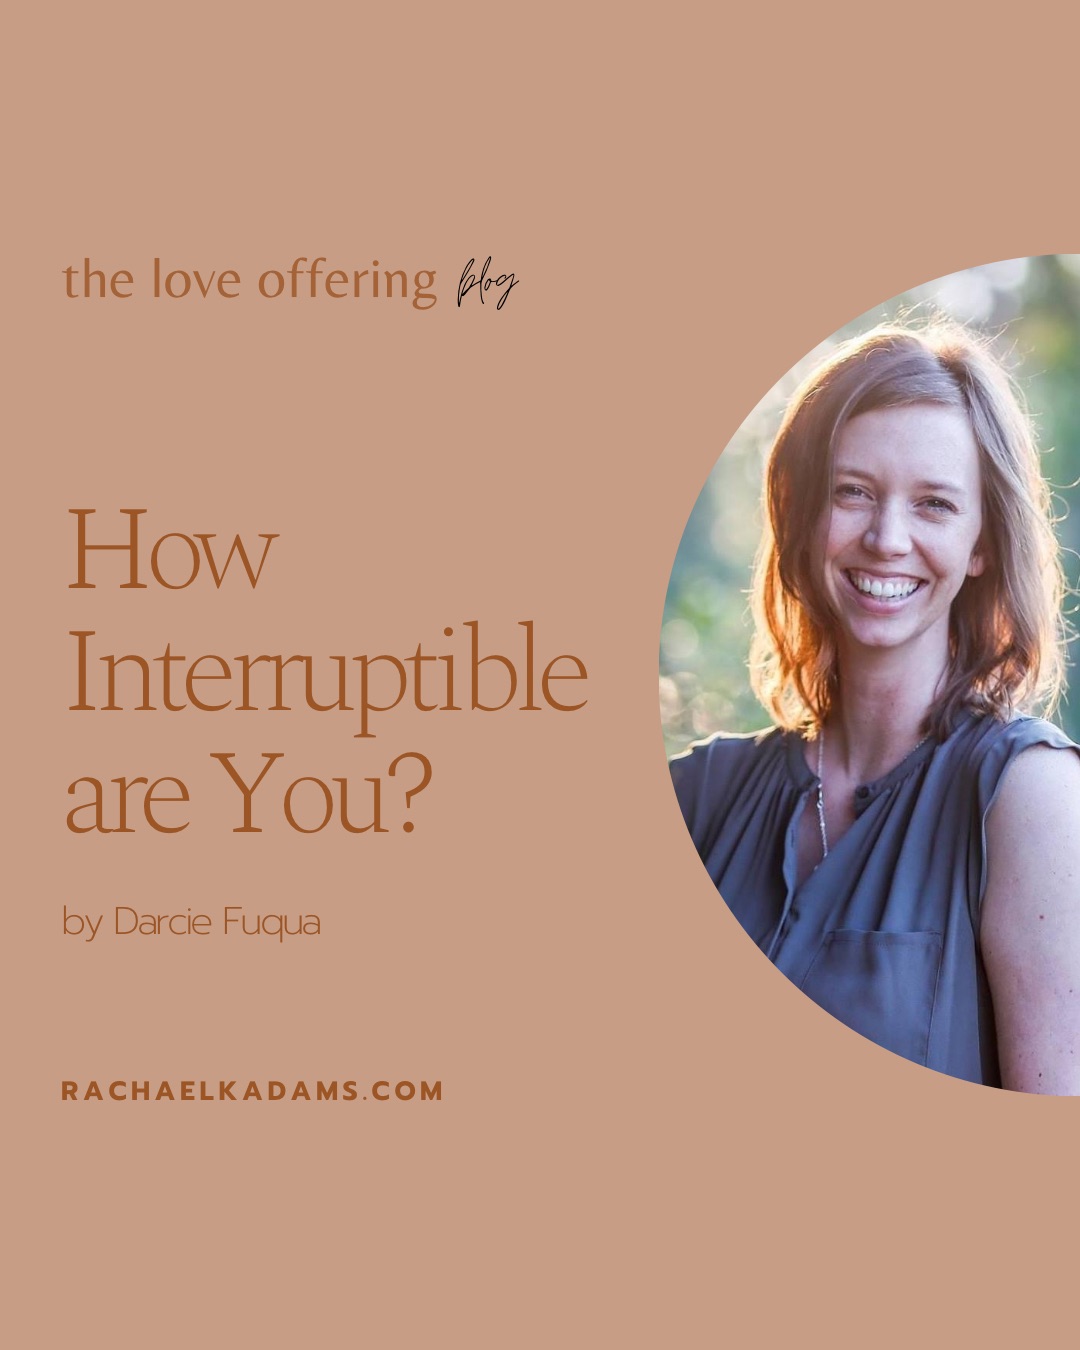 How Interruptible are You? By Darcie Fuqua